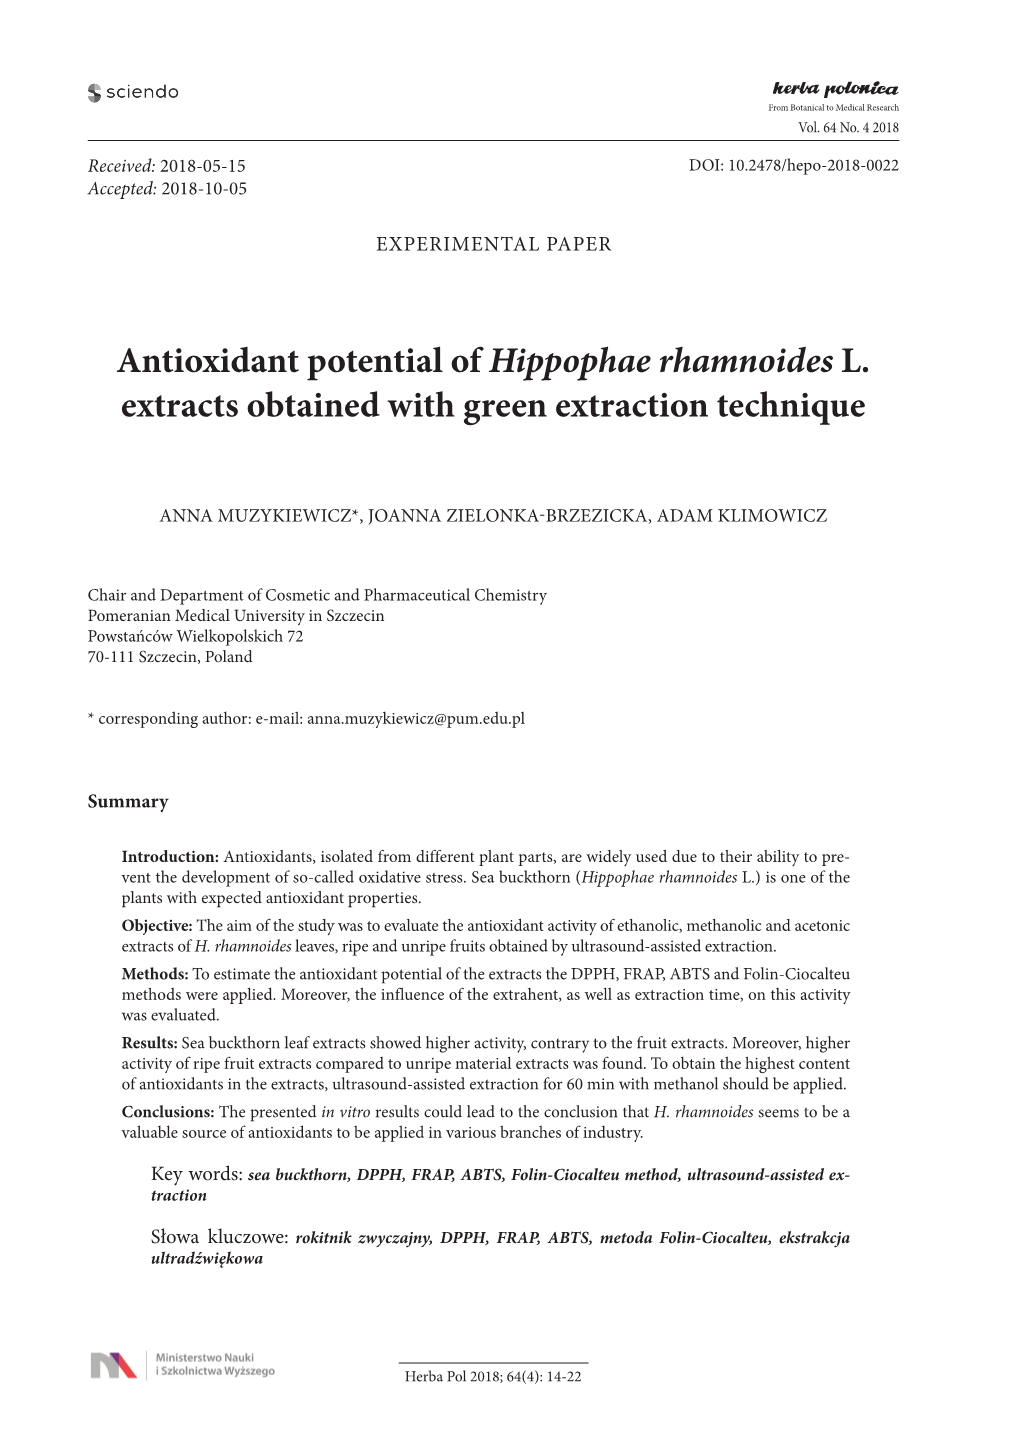 Antioxidant Potential of Hippophae Rhamnoides L. Extracts Obtained with Green Extraction Technique